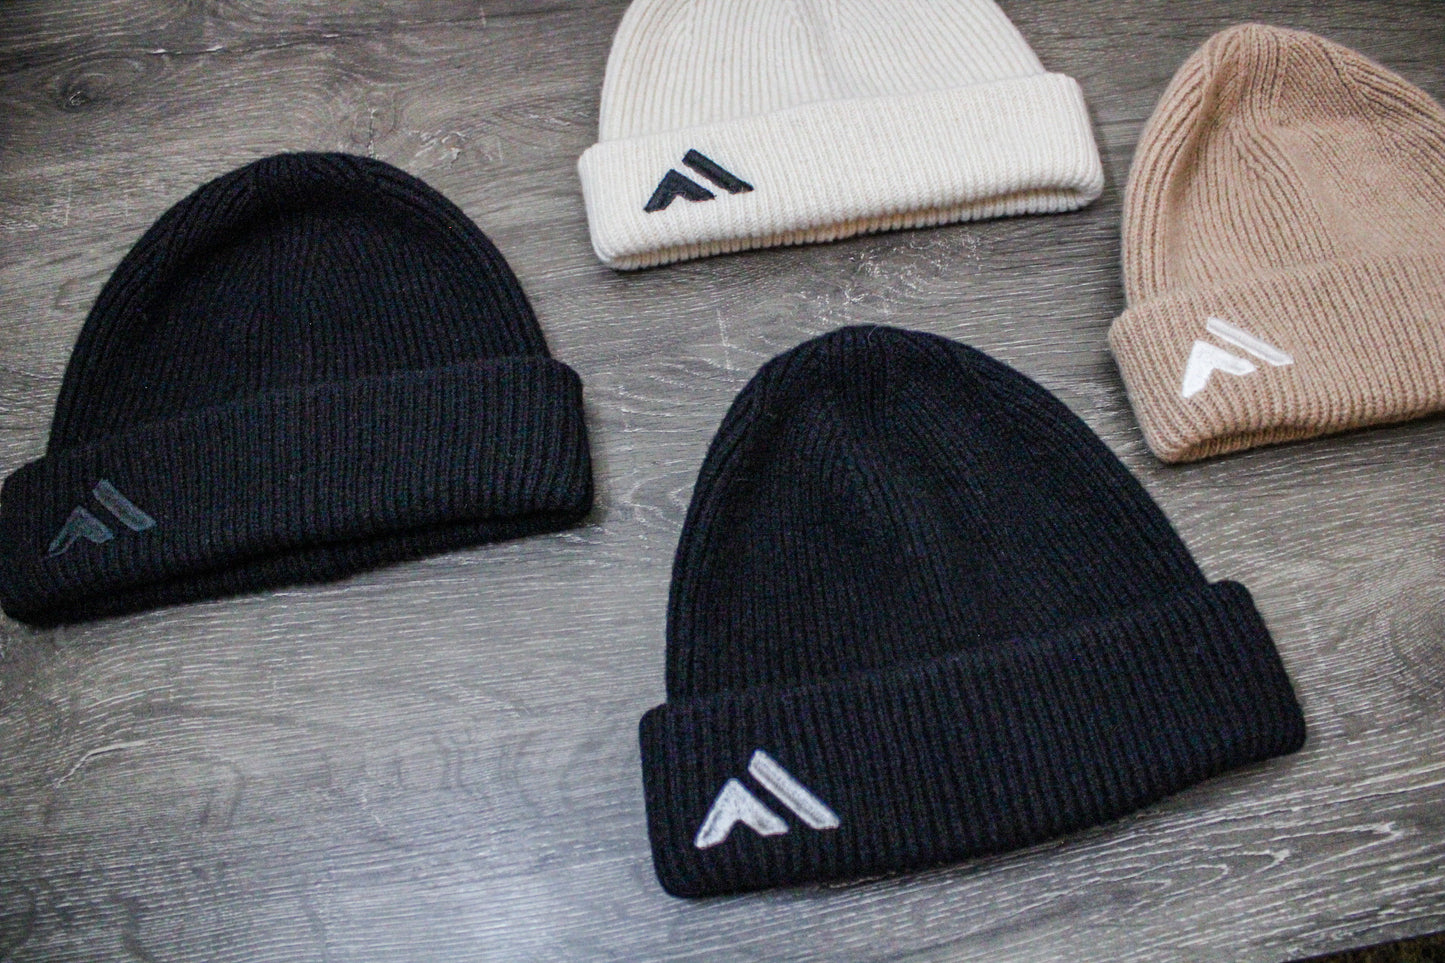 Pack Of 4 Beanies